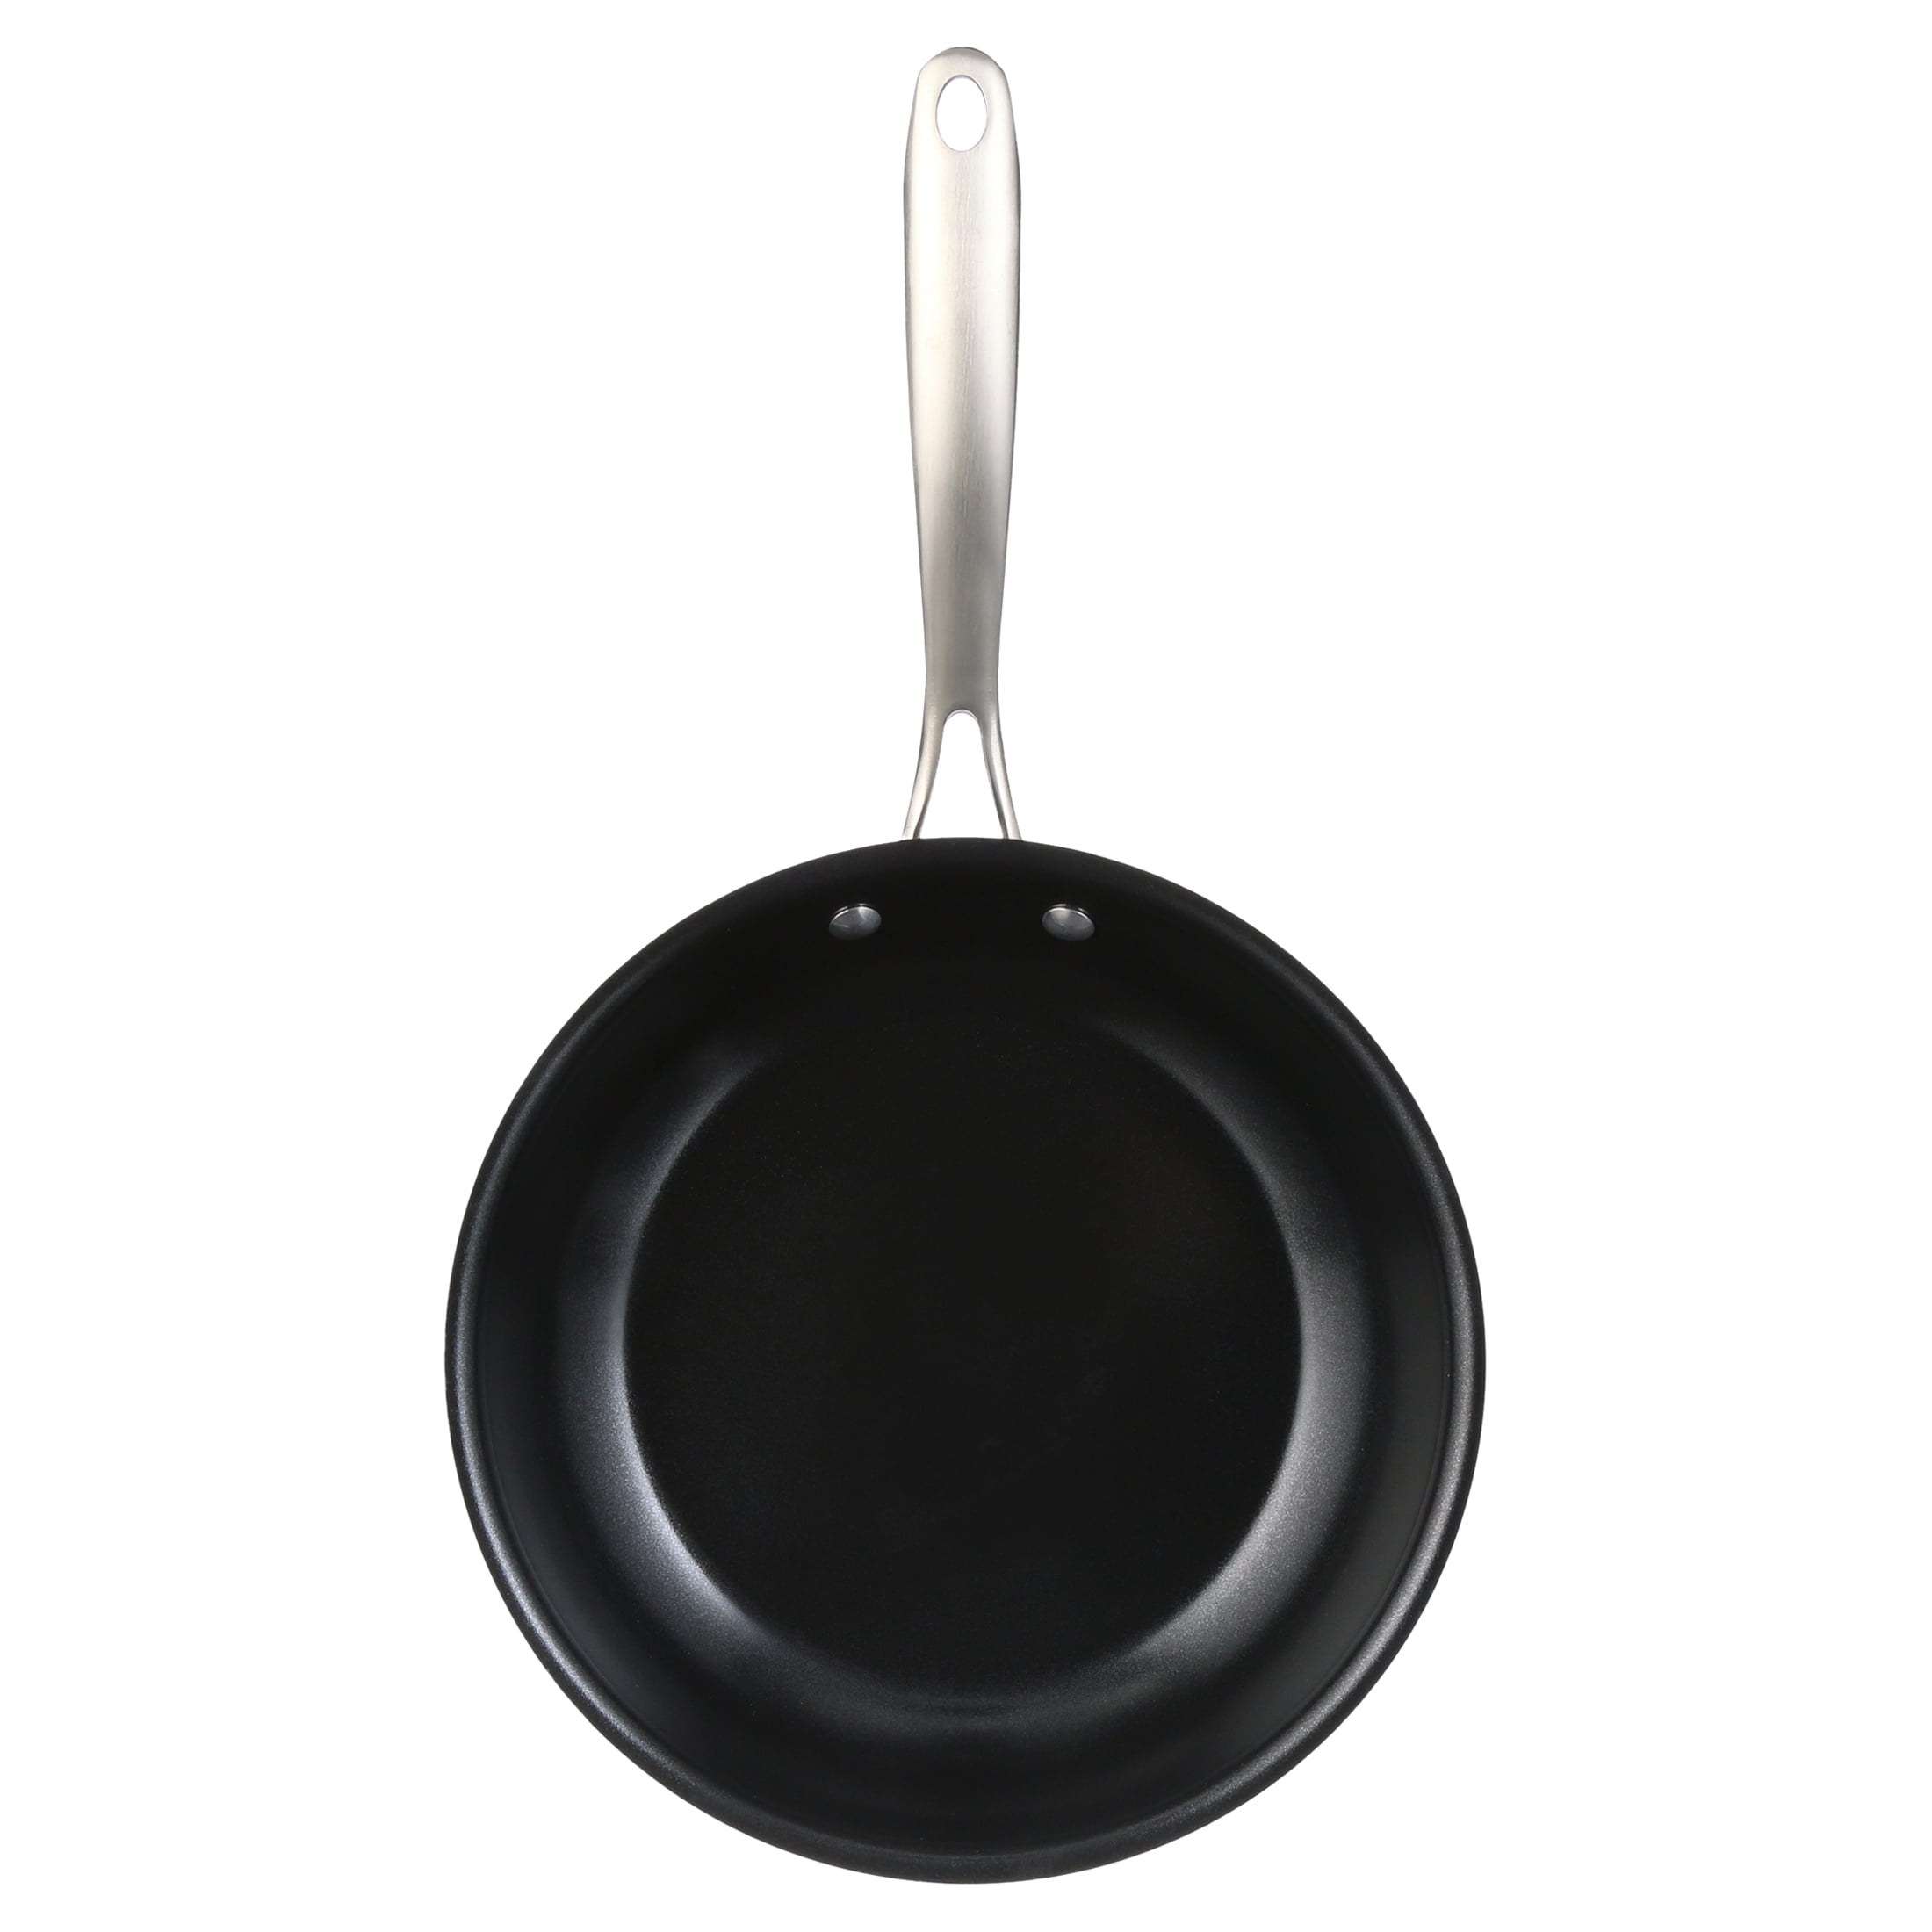 Cuisinart GG22-30P1 Hard Anodized 12-Inch Skillet GreenGourmet,  Black/Stainless Steel